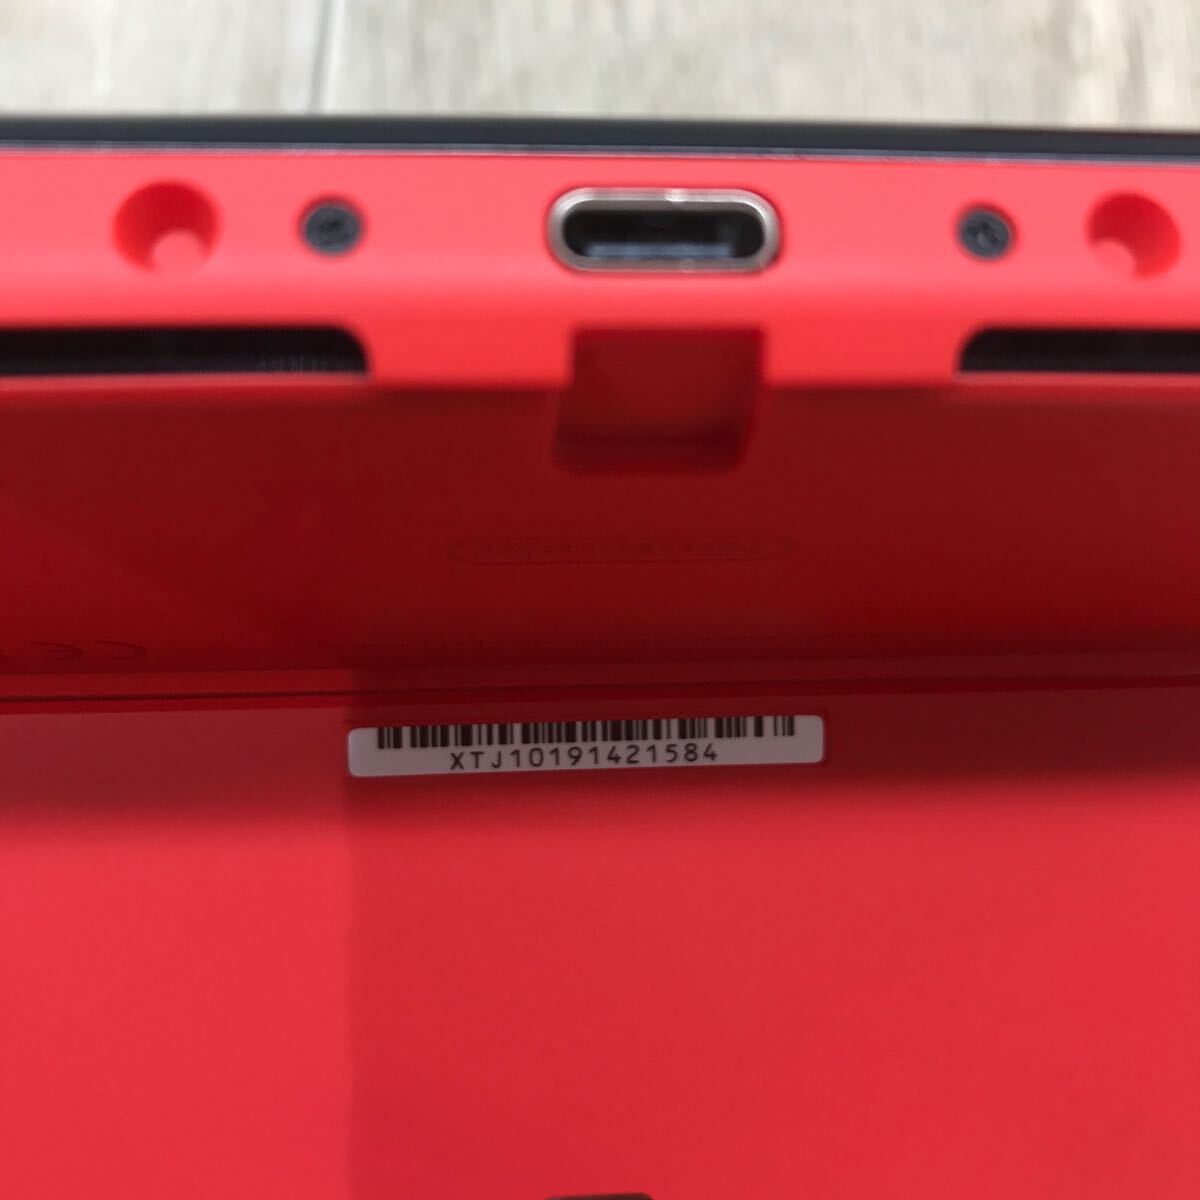 070 A [ secondhand goods ] Nintendo Switch body have machine EL model Mario red nintendo Nintendo switch [ operation verification * the first period . settled ]